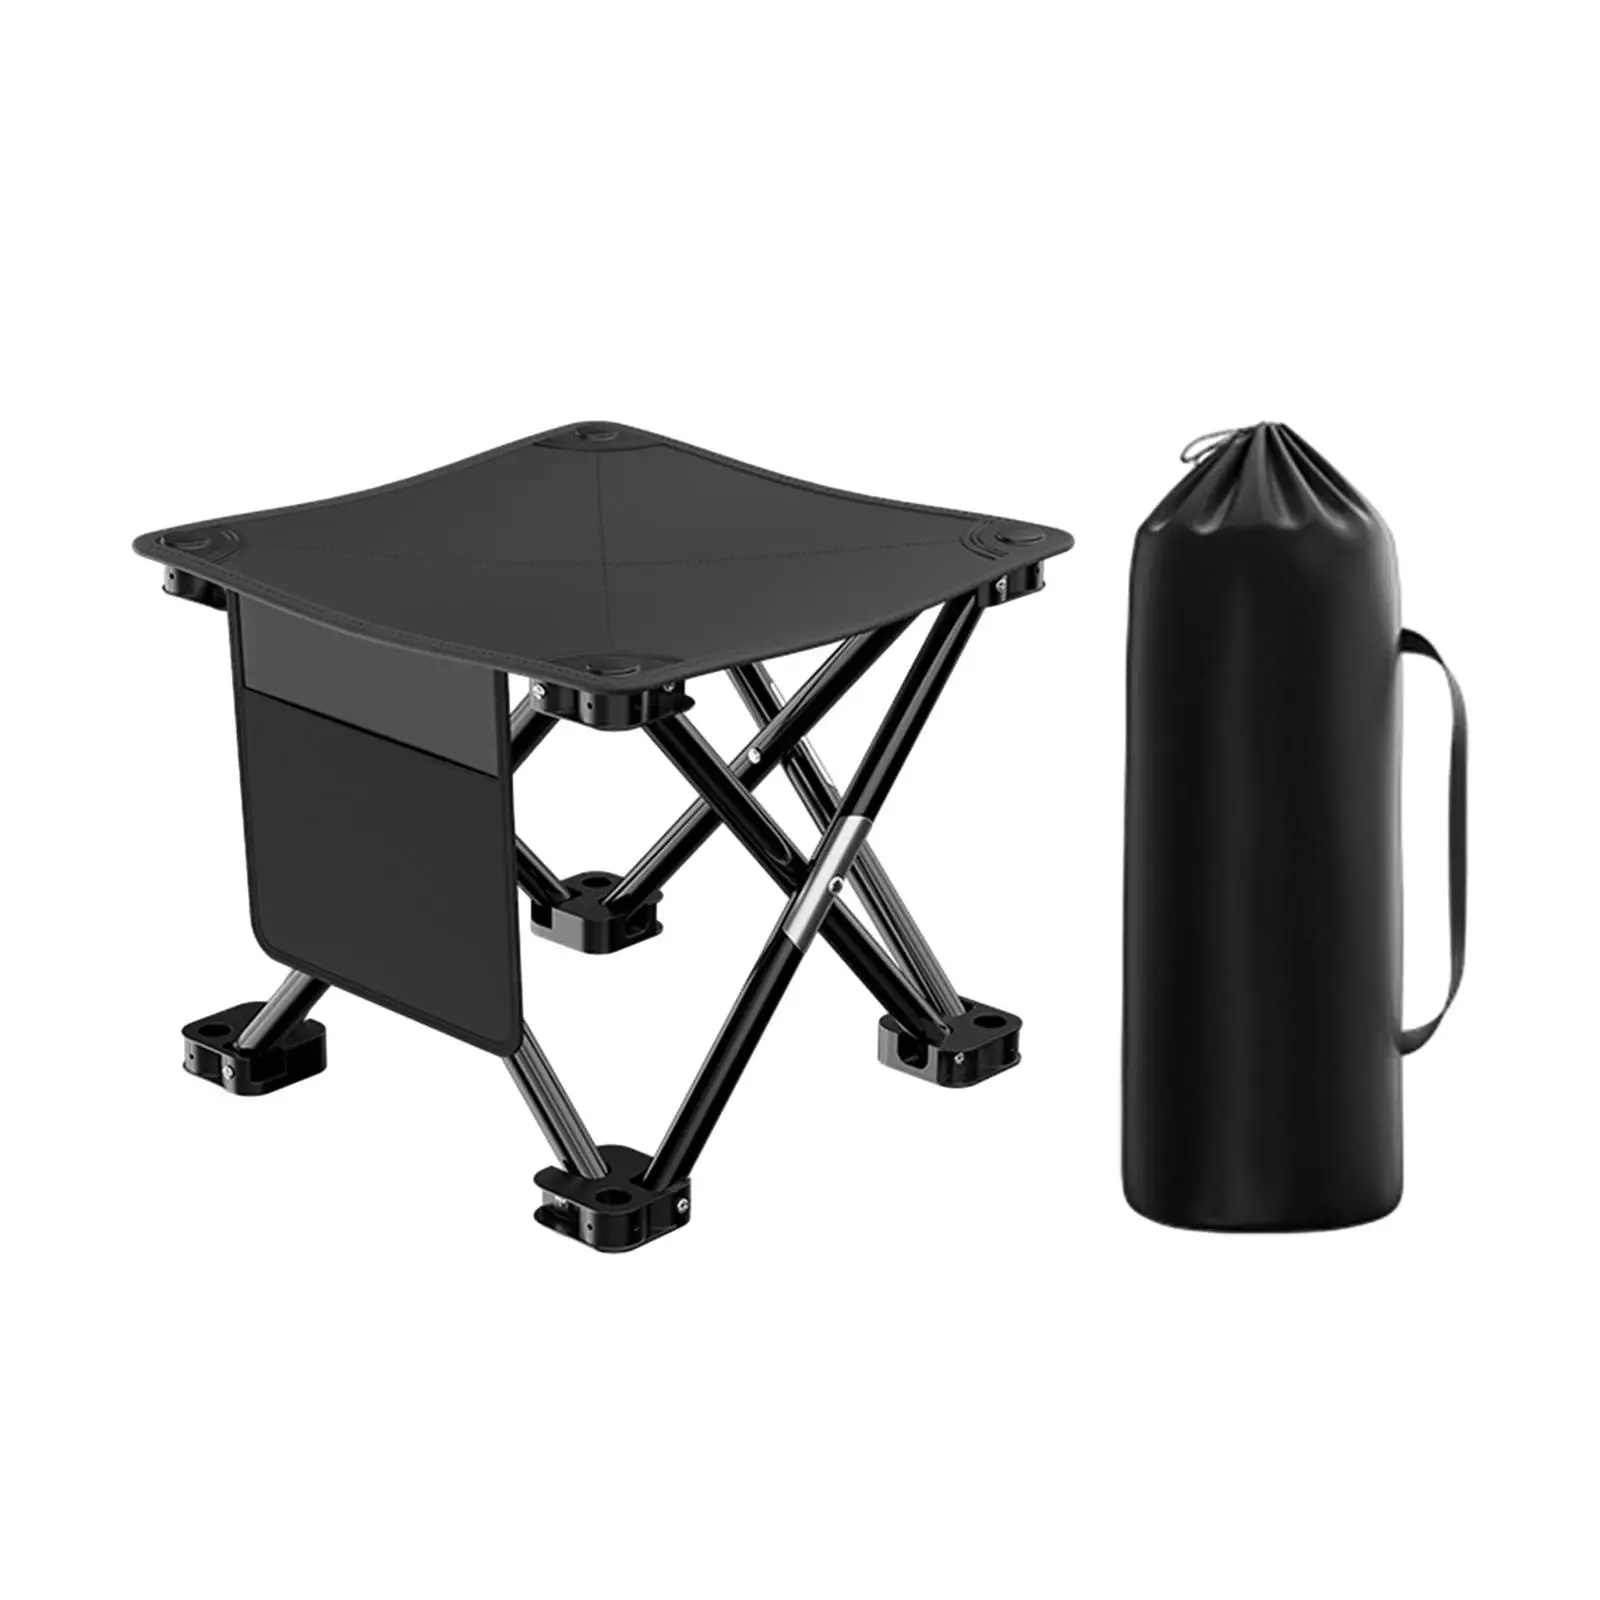 Folding Camping Stool Fishing Chair Lightweight with Side Pocket Foldable Footstool for Beach Hiking BBQ Gardening Concert